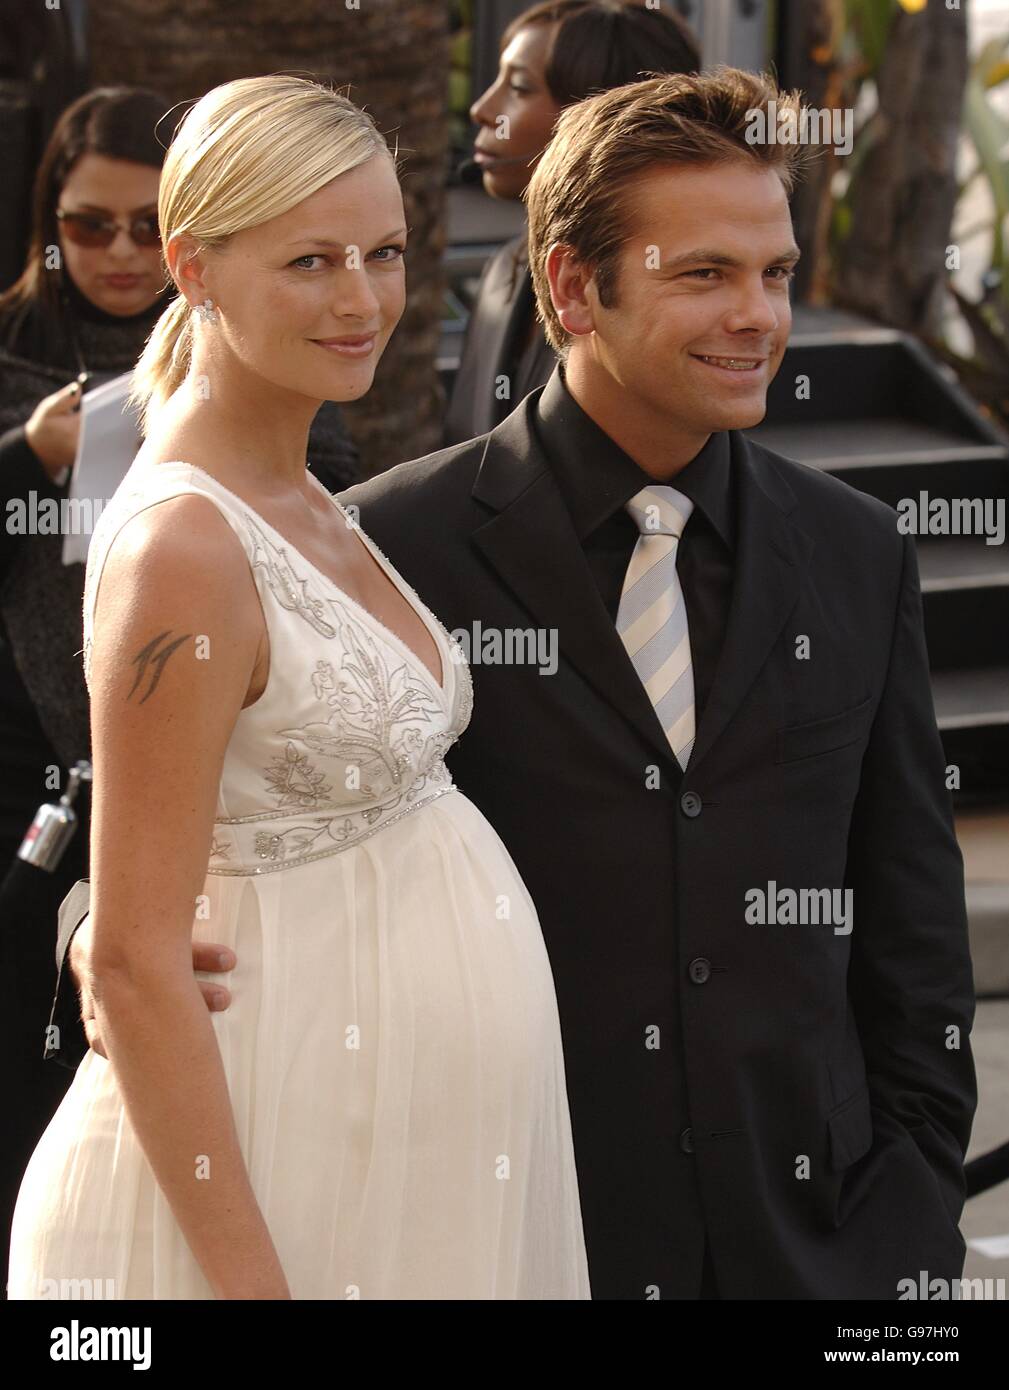 Sarah O'Hare and Lachlan Murdoch arrive on the red carpet. Stock Photo